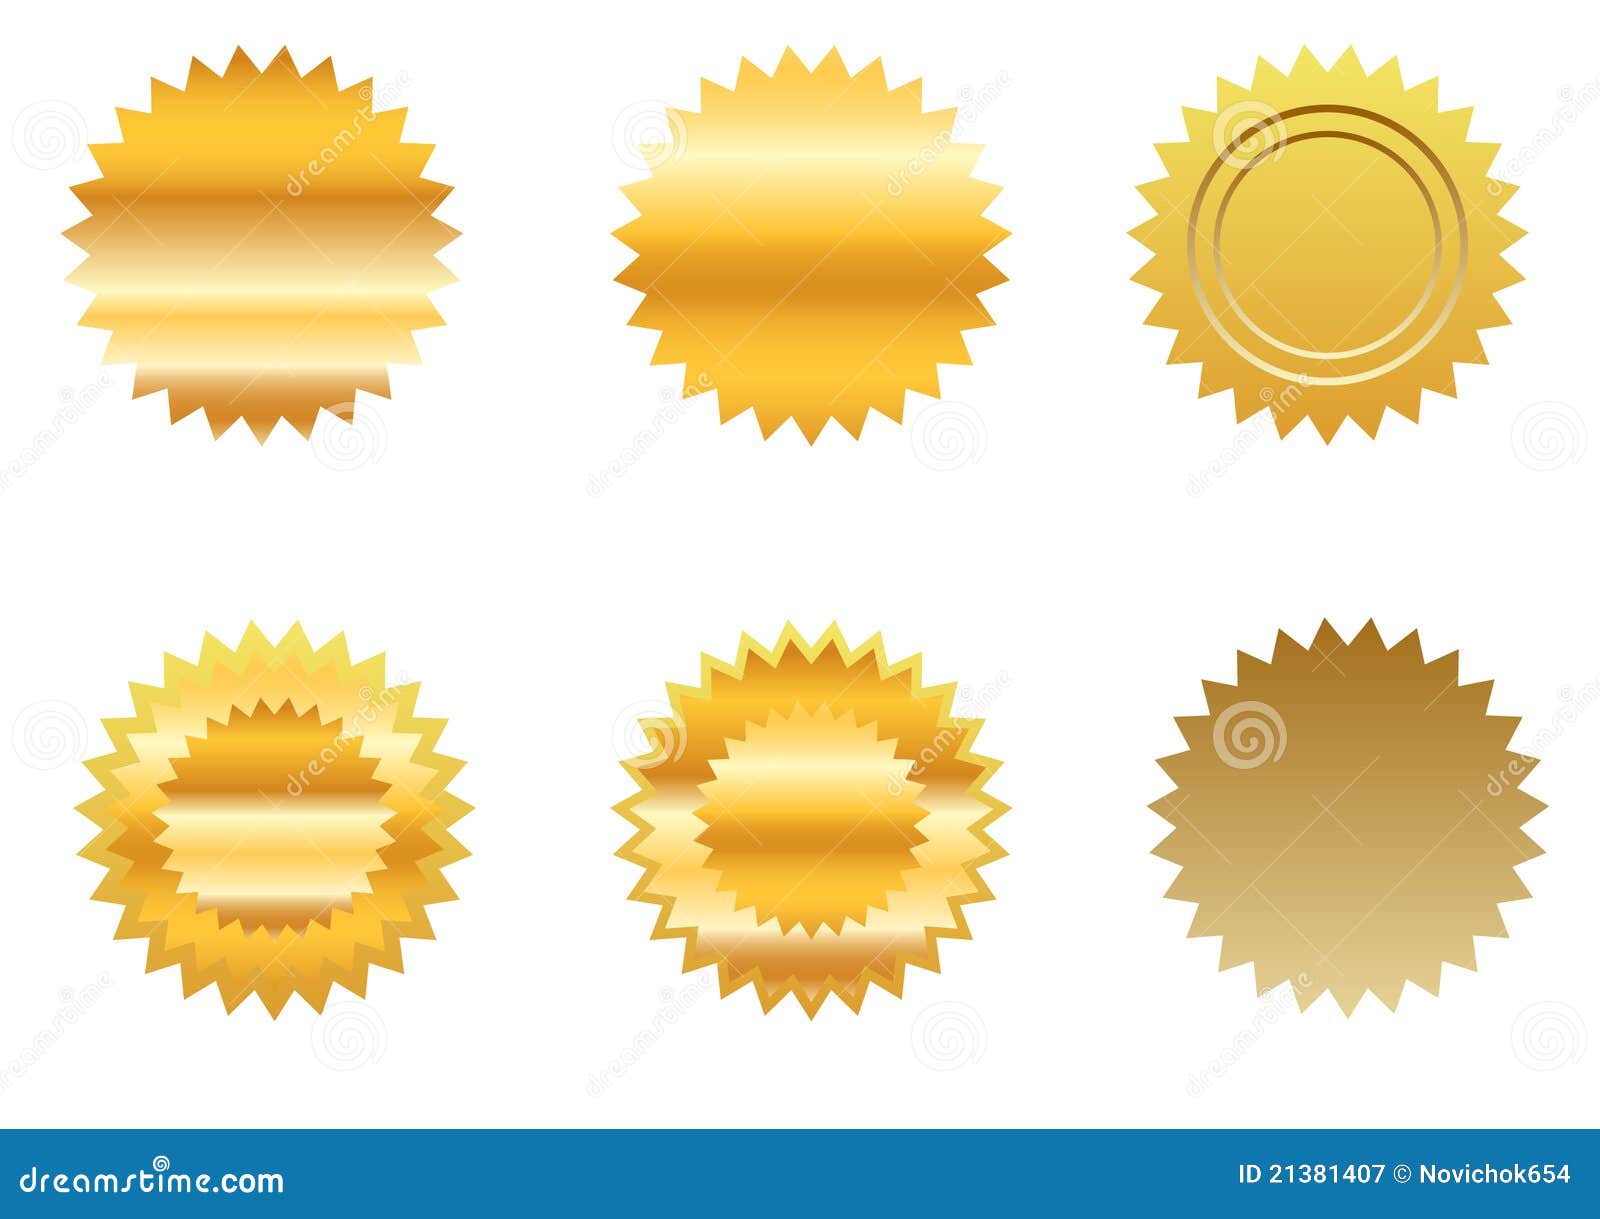 golden shiny vintage top seller *3D vector icon seal sign Stock